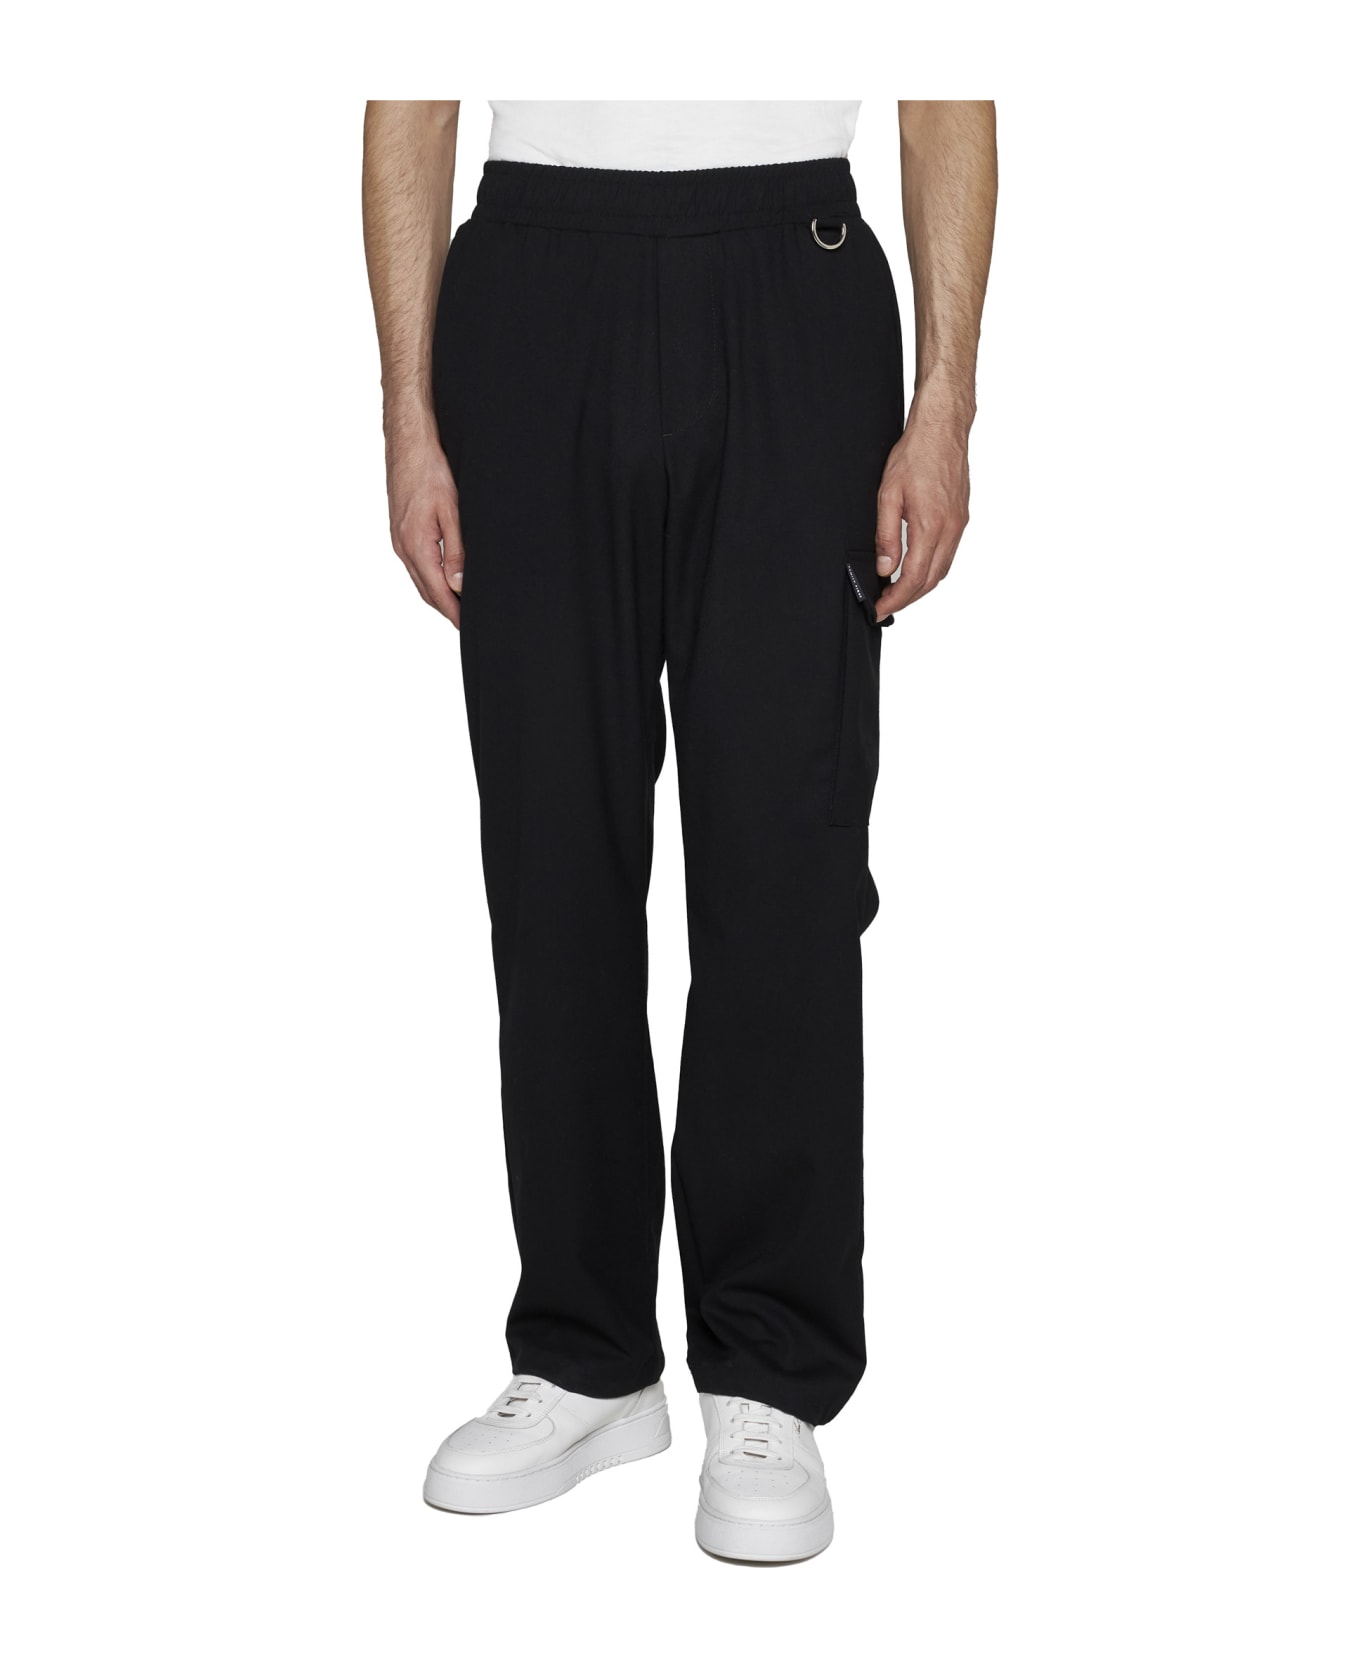 Family First Milano Pants - Black